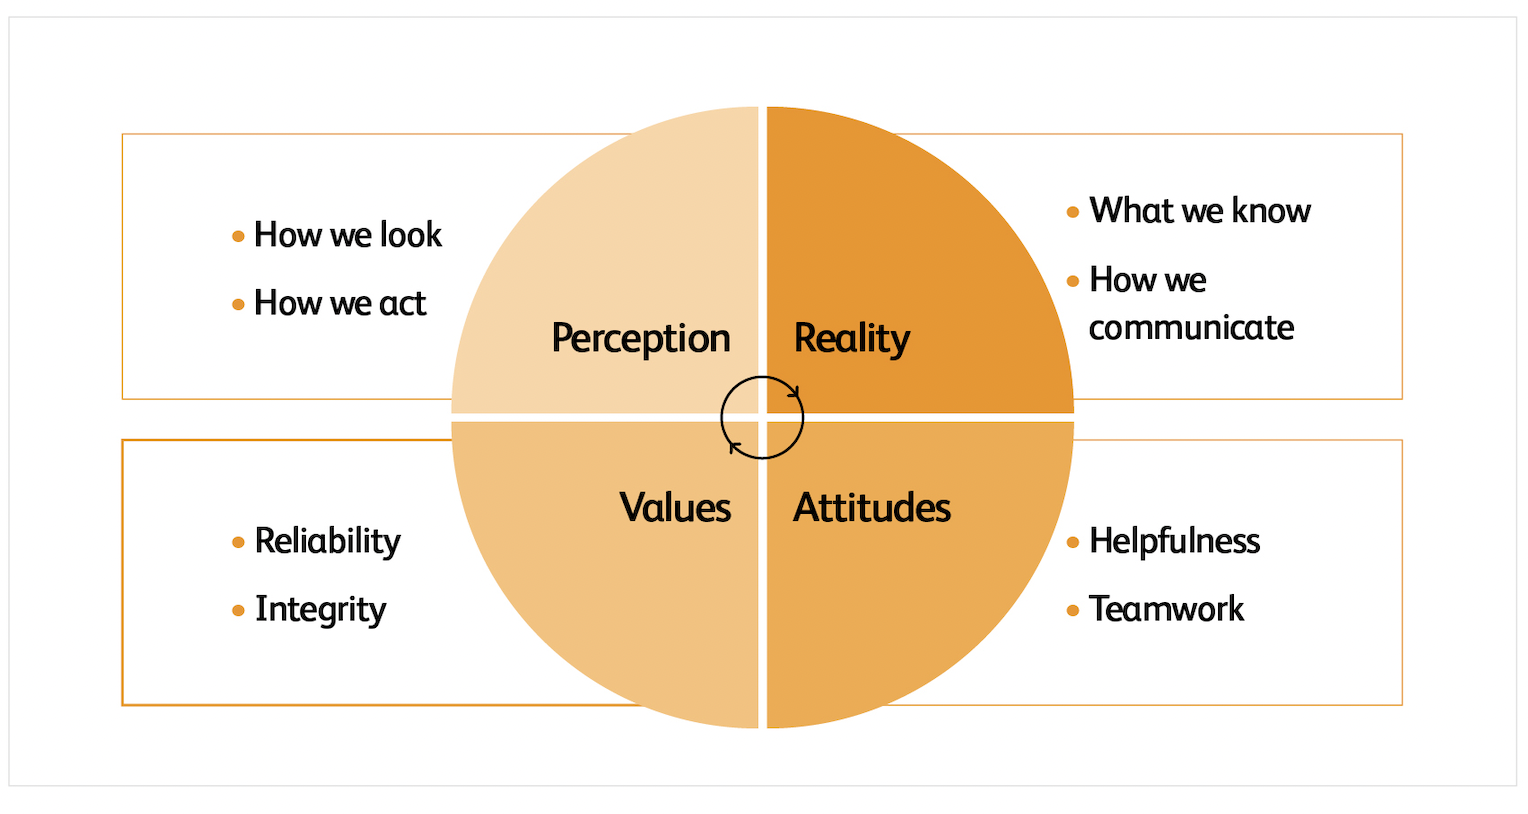 Chart, pie chart: First quarter: Perception: How we look, how we act Second quarter: Reality: What we know, how we communicate Third quarter: Values: Reliability, integrity Fourth quarter: Attitudes: Helpfulness, teamwork Figure 2: Byrne and Weerawardane’s Model of Professionalism in Practice